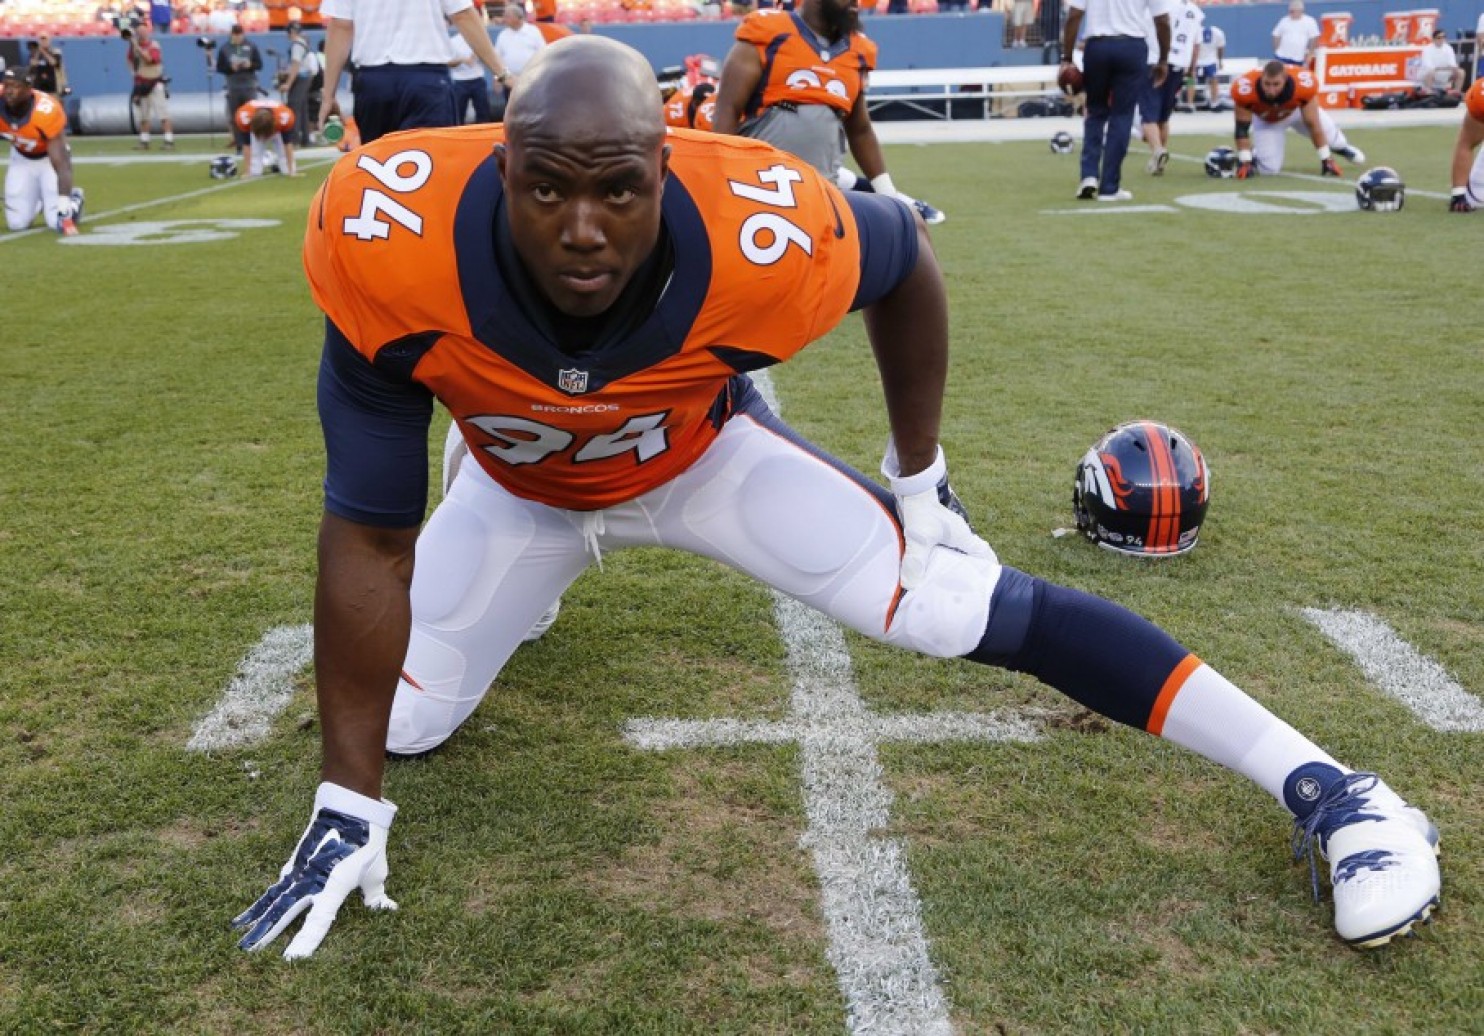 Courtesy of Washington Post: Ware struggled big time in a pass-rushing role this year. 